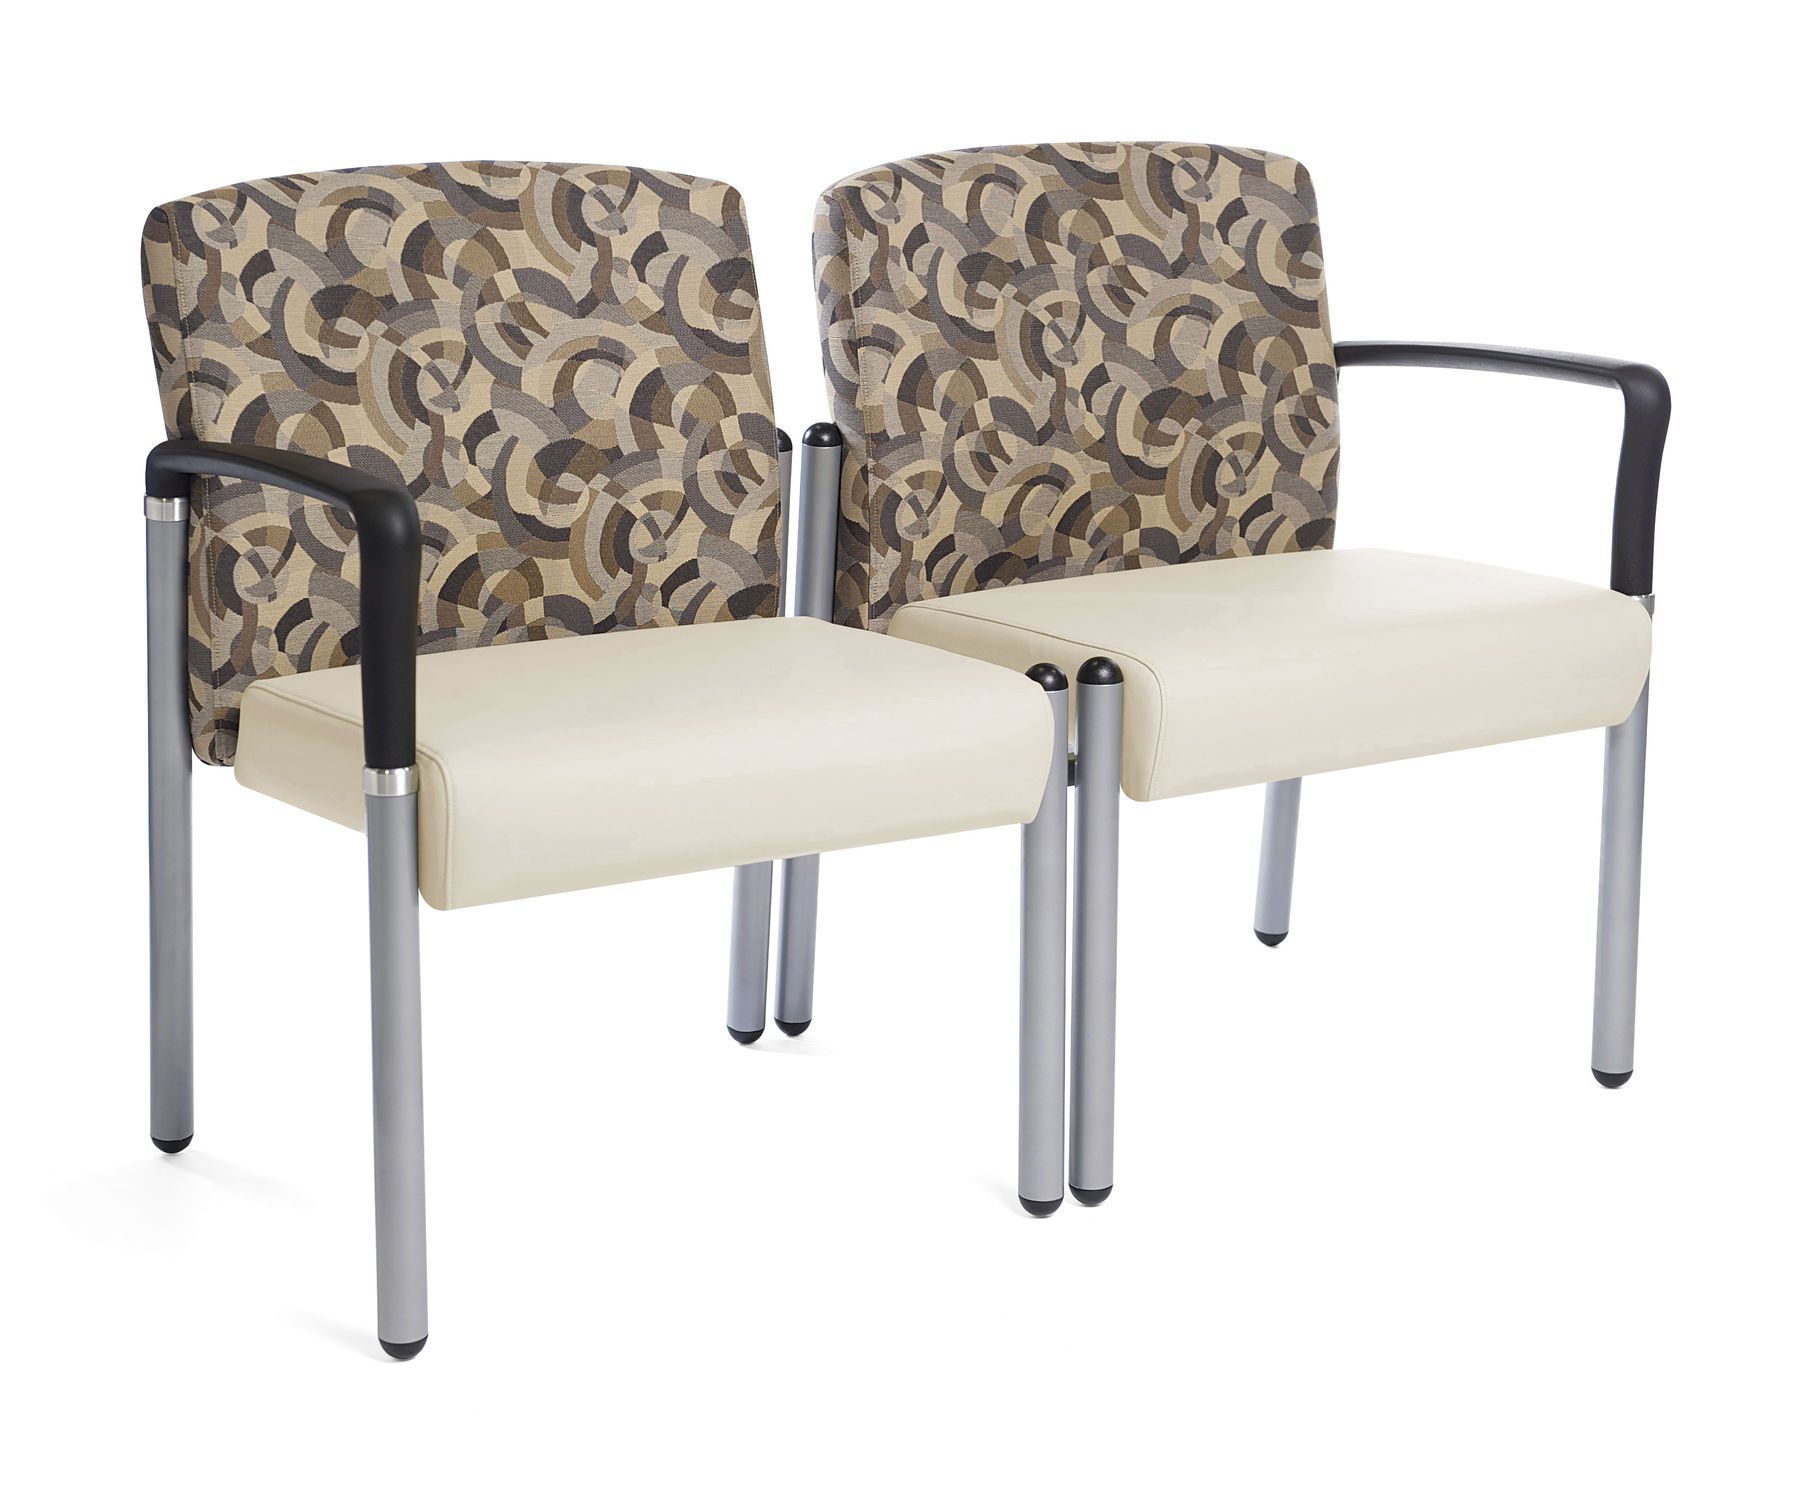 Chair with armrests Integrity Stance Healthcare